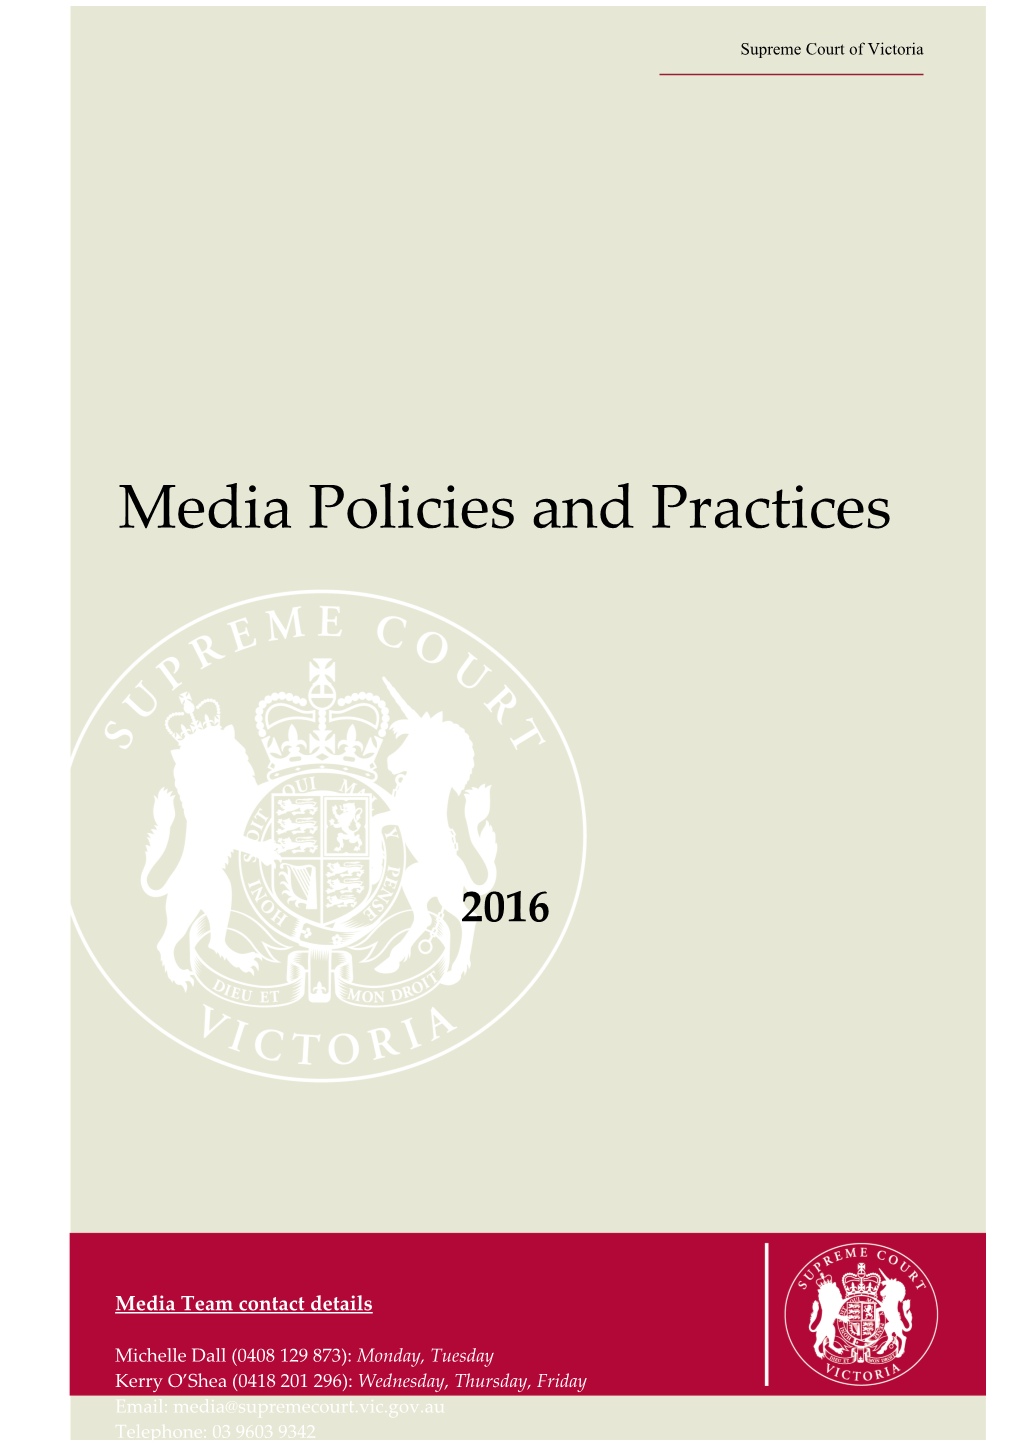 Media Policies and Practices